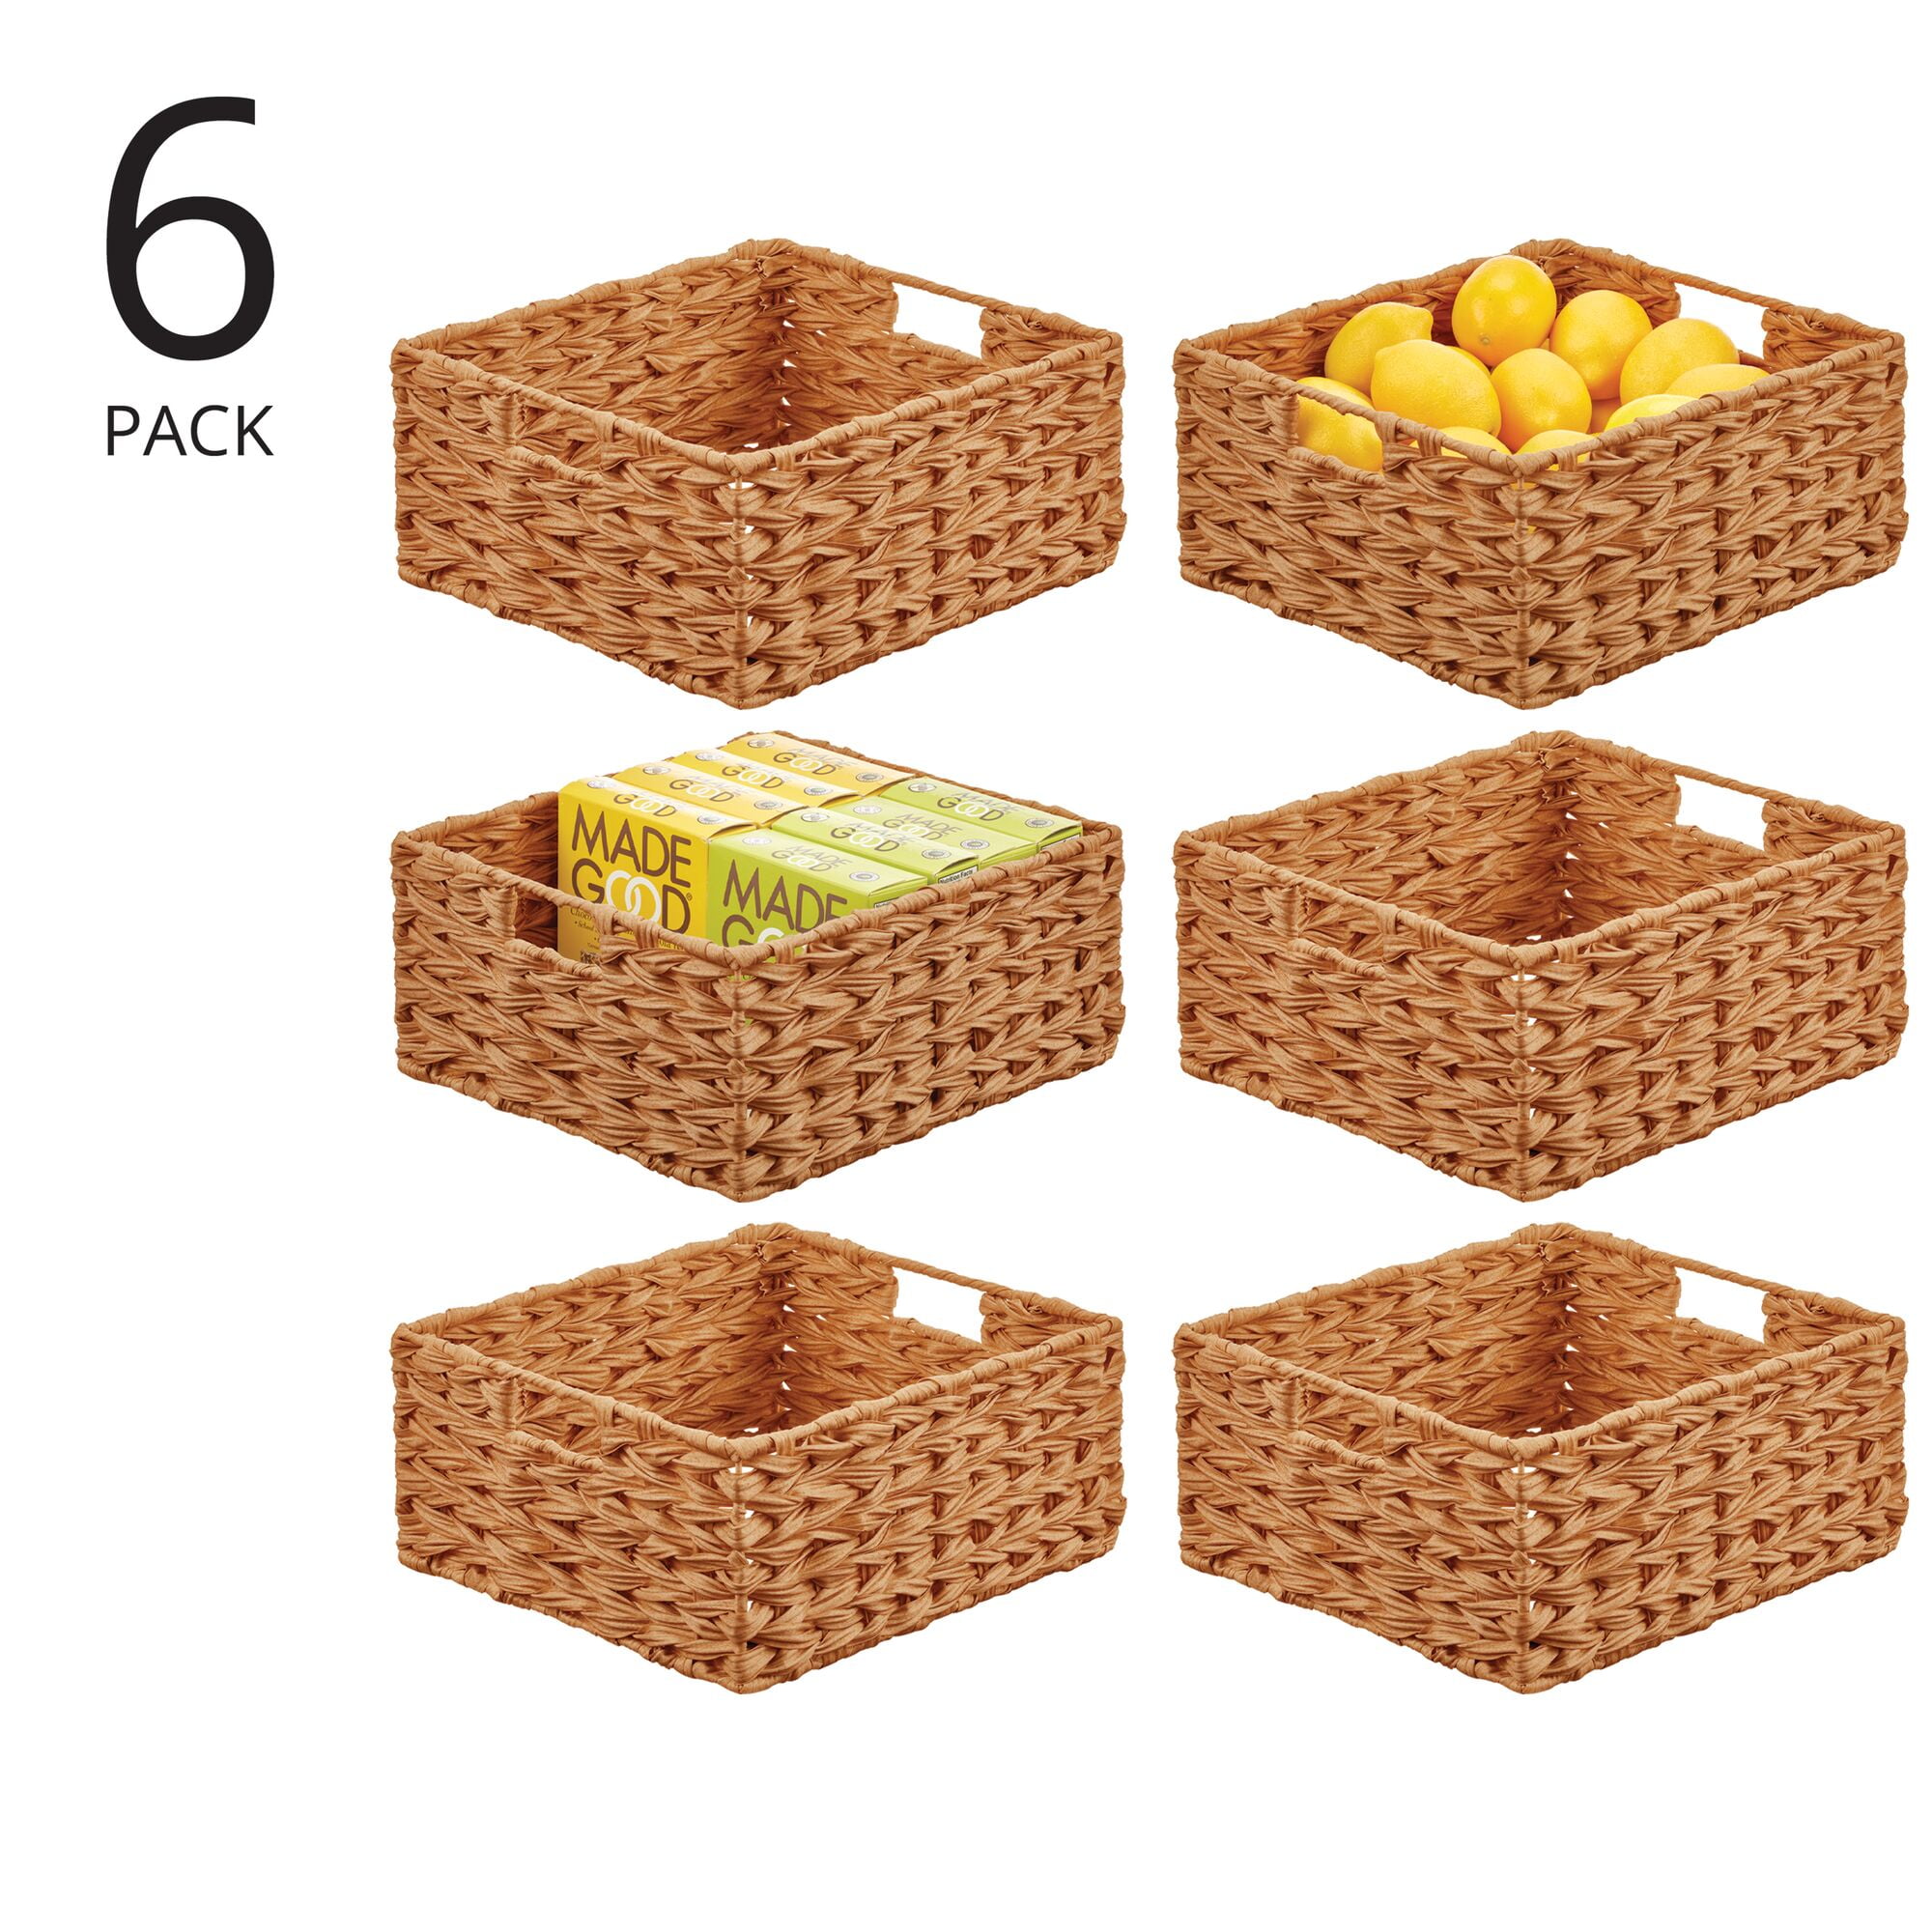 Rinboat Multi-Colored Plastic Storage Baskets, Office Drawer Organizer  Baskets, 6 Packs, F